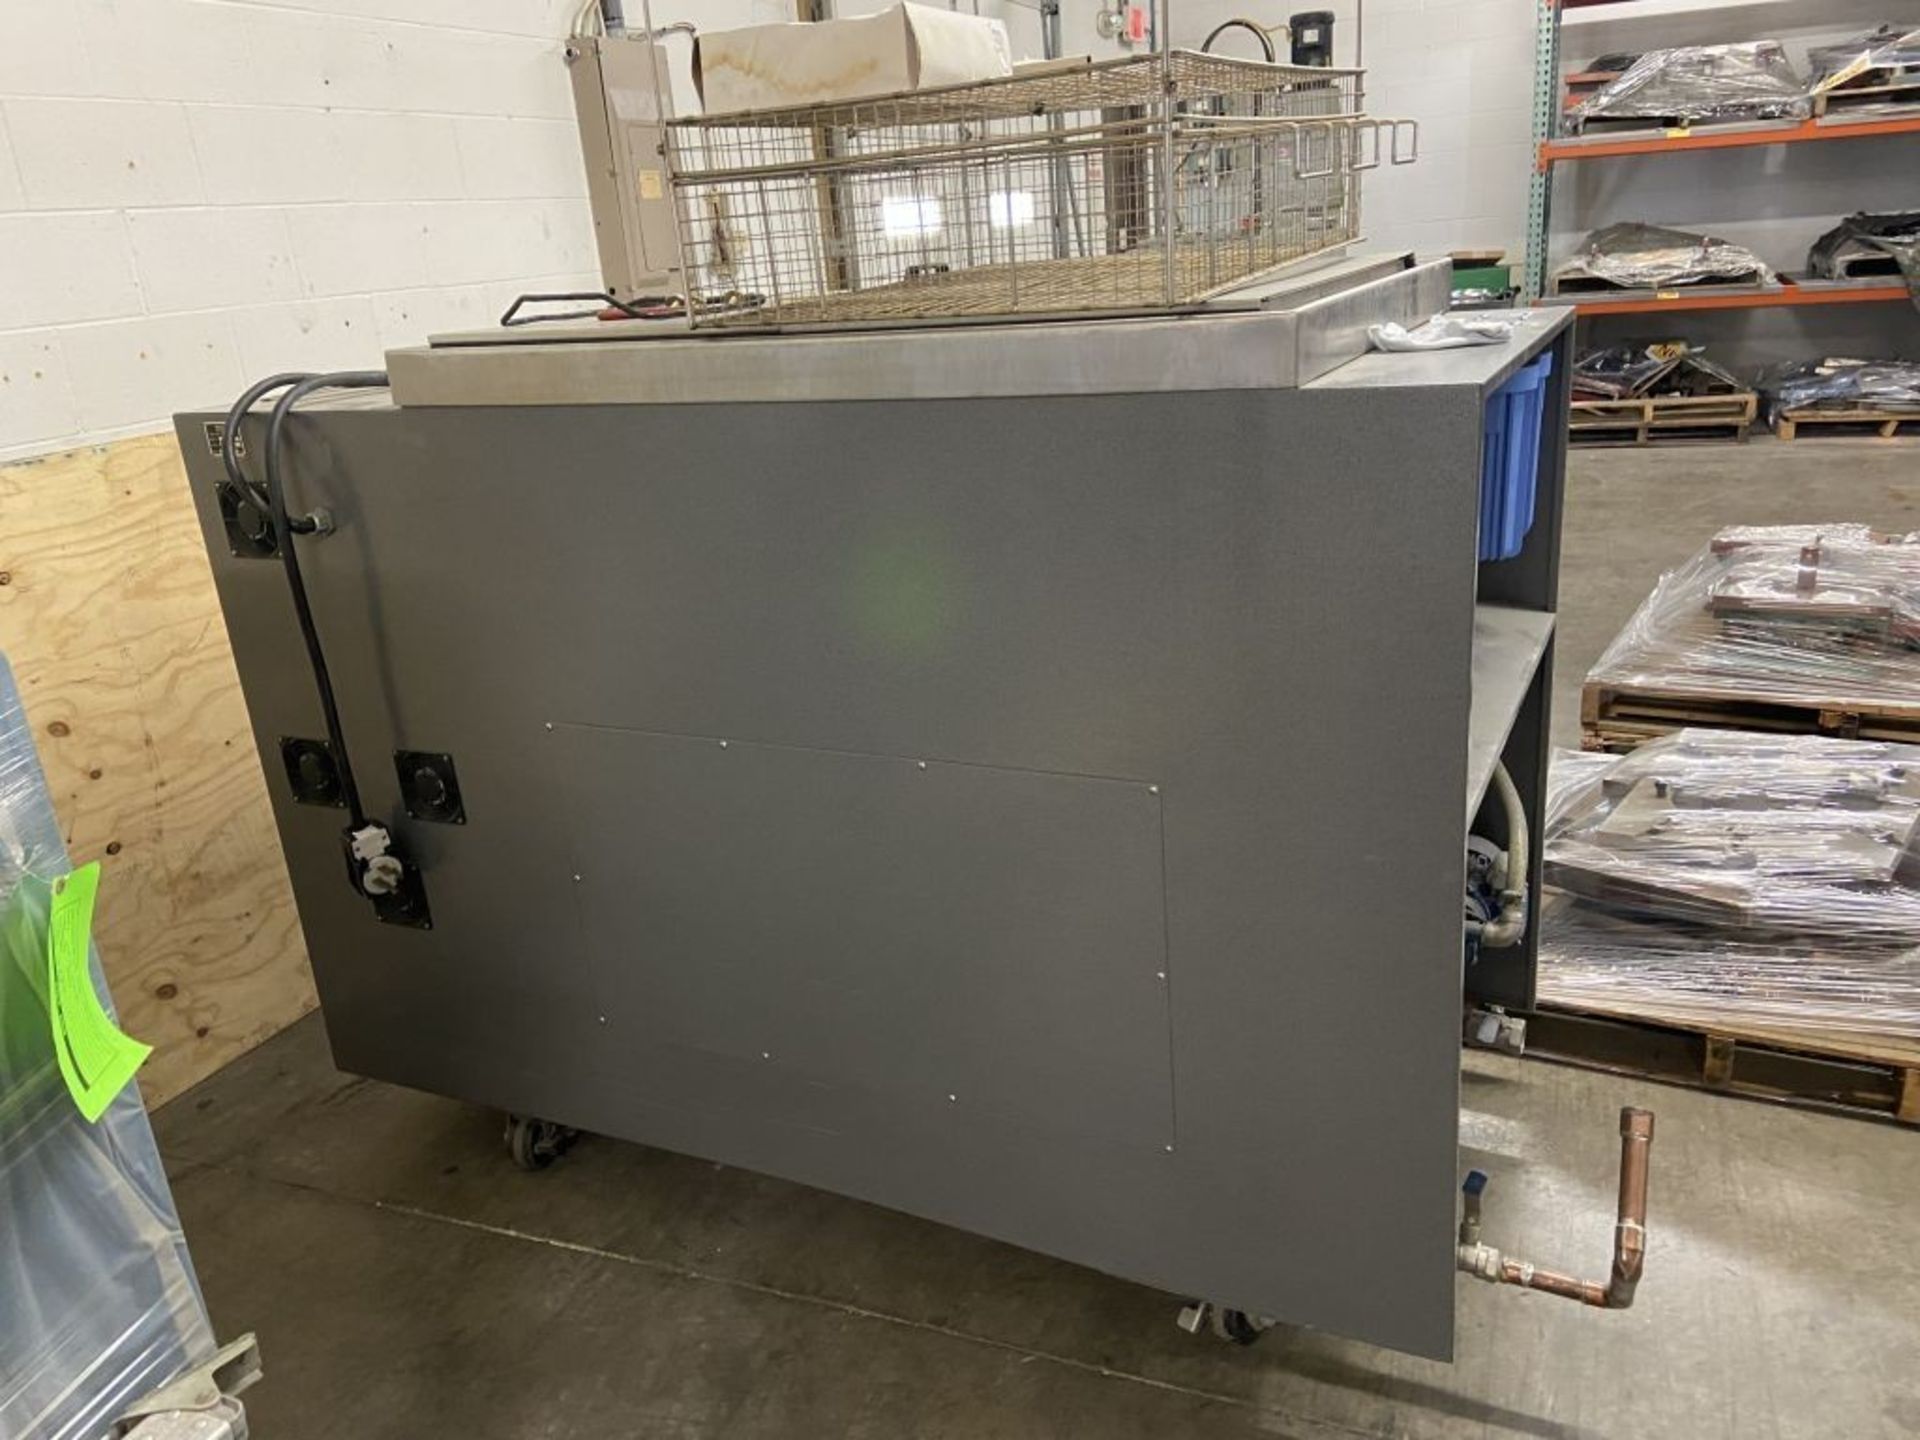 Omegasonics Parts Washer. Model: OMG4430, Serial: APOMG4430-255, Age: Purchased in 2015, Power - Image 2 of 7